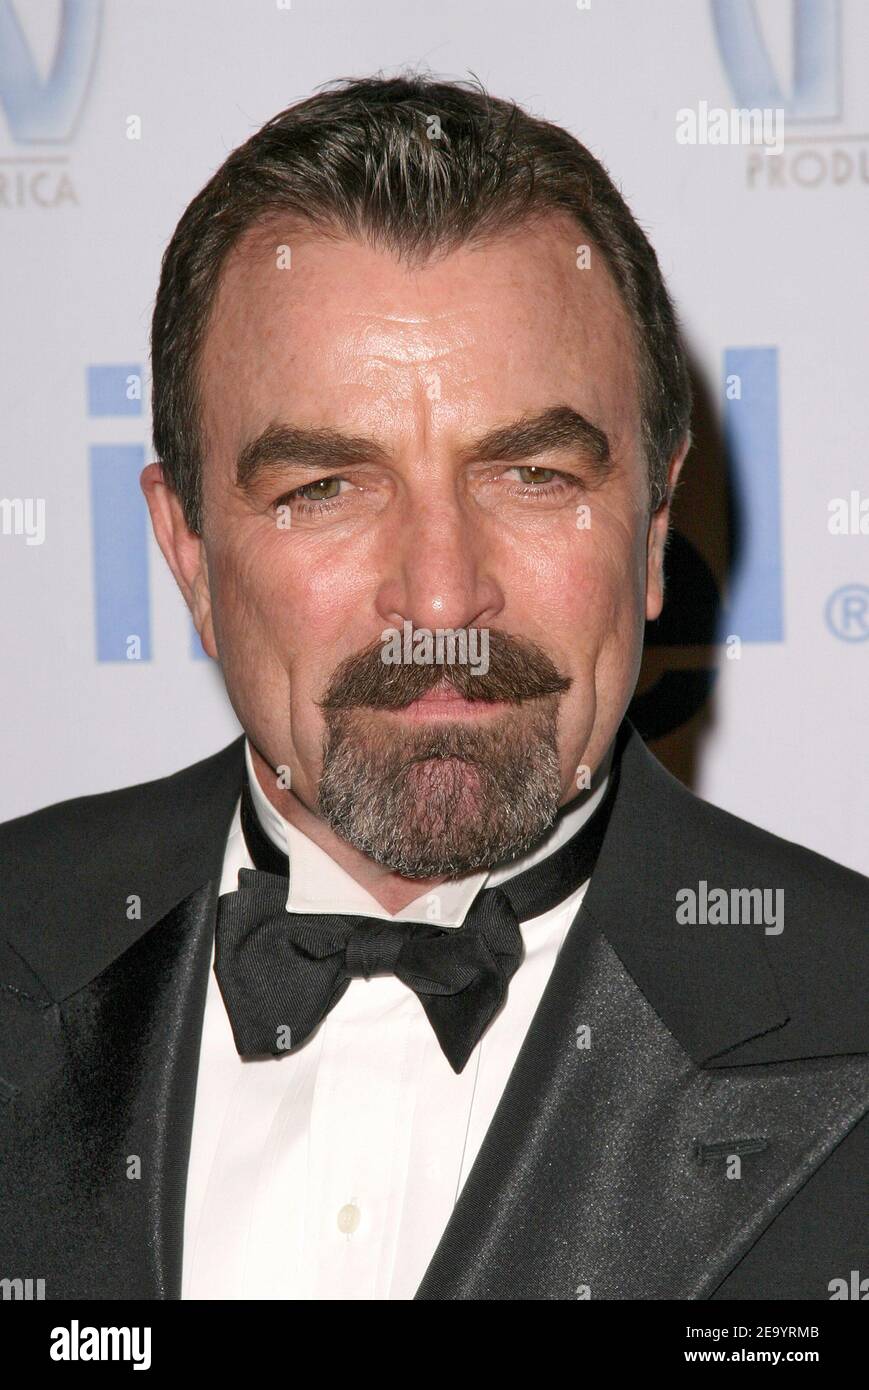 Tom Selleck attends the 16th Annual Producers Guild of America Awards held at the Culver Studios in Culver City, CA on January 22, 2005. Photo by Denise Fleming/ABACA. Stock Photo